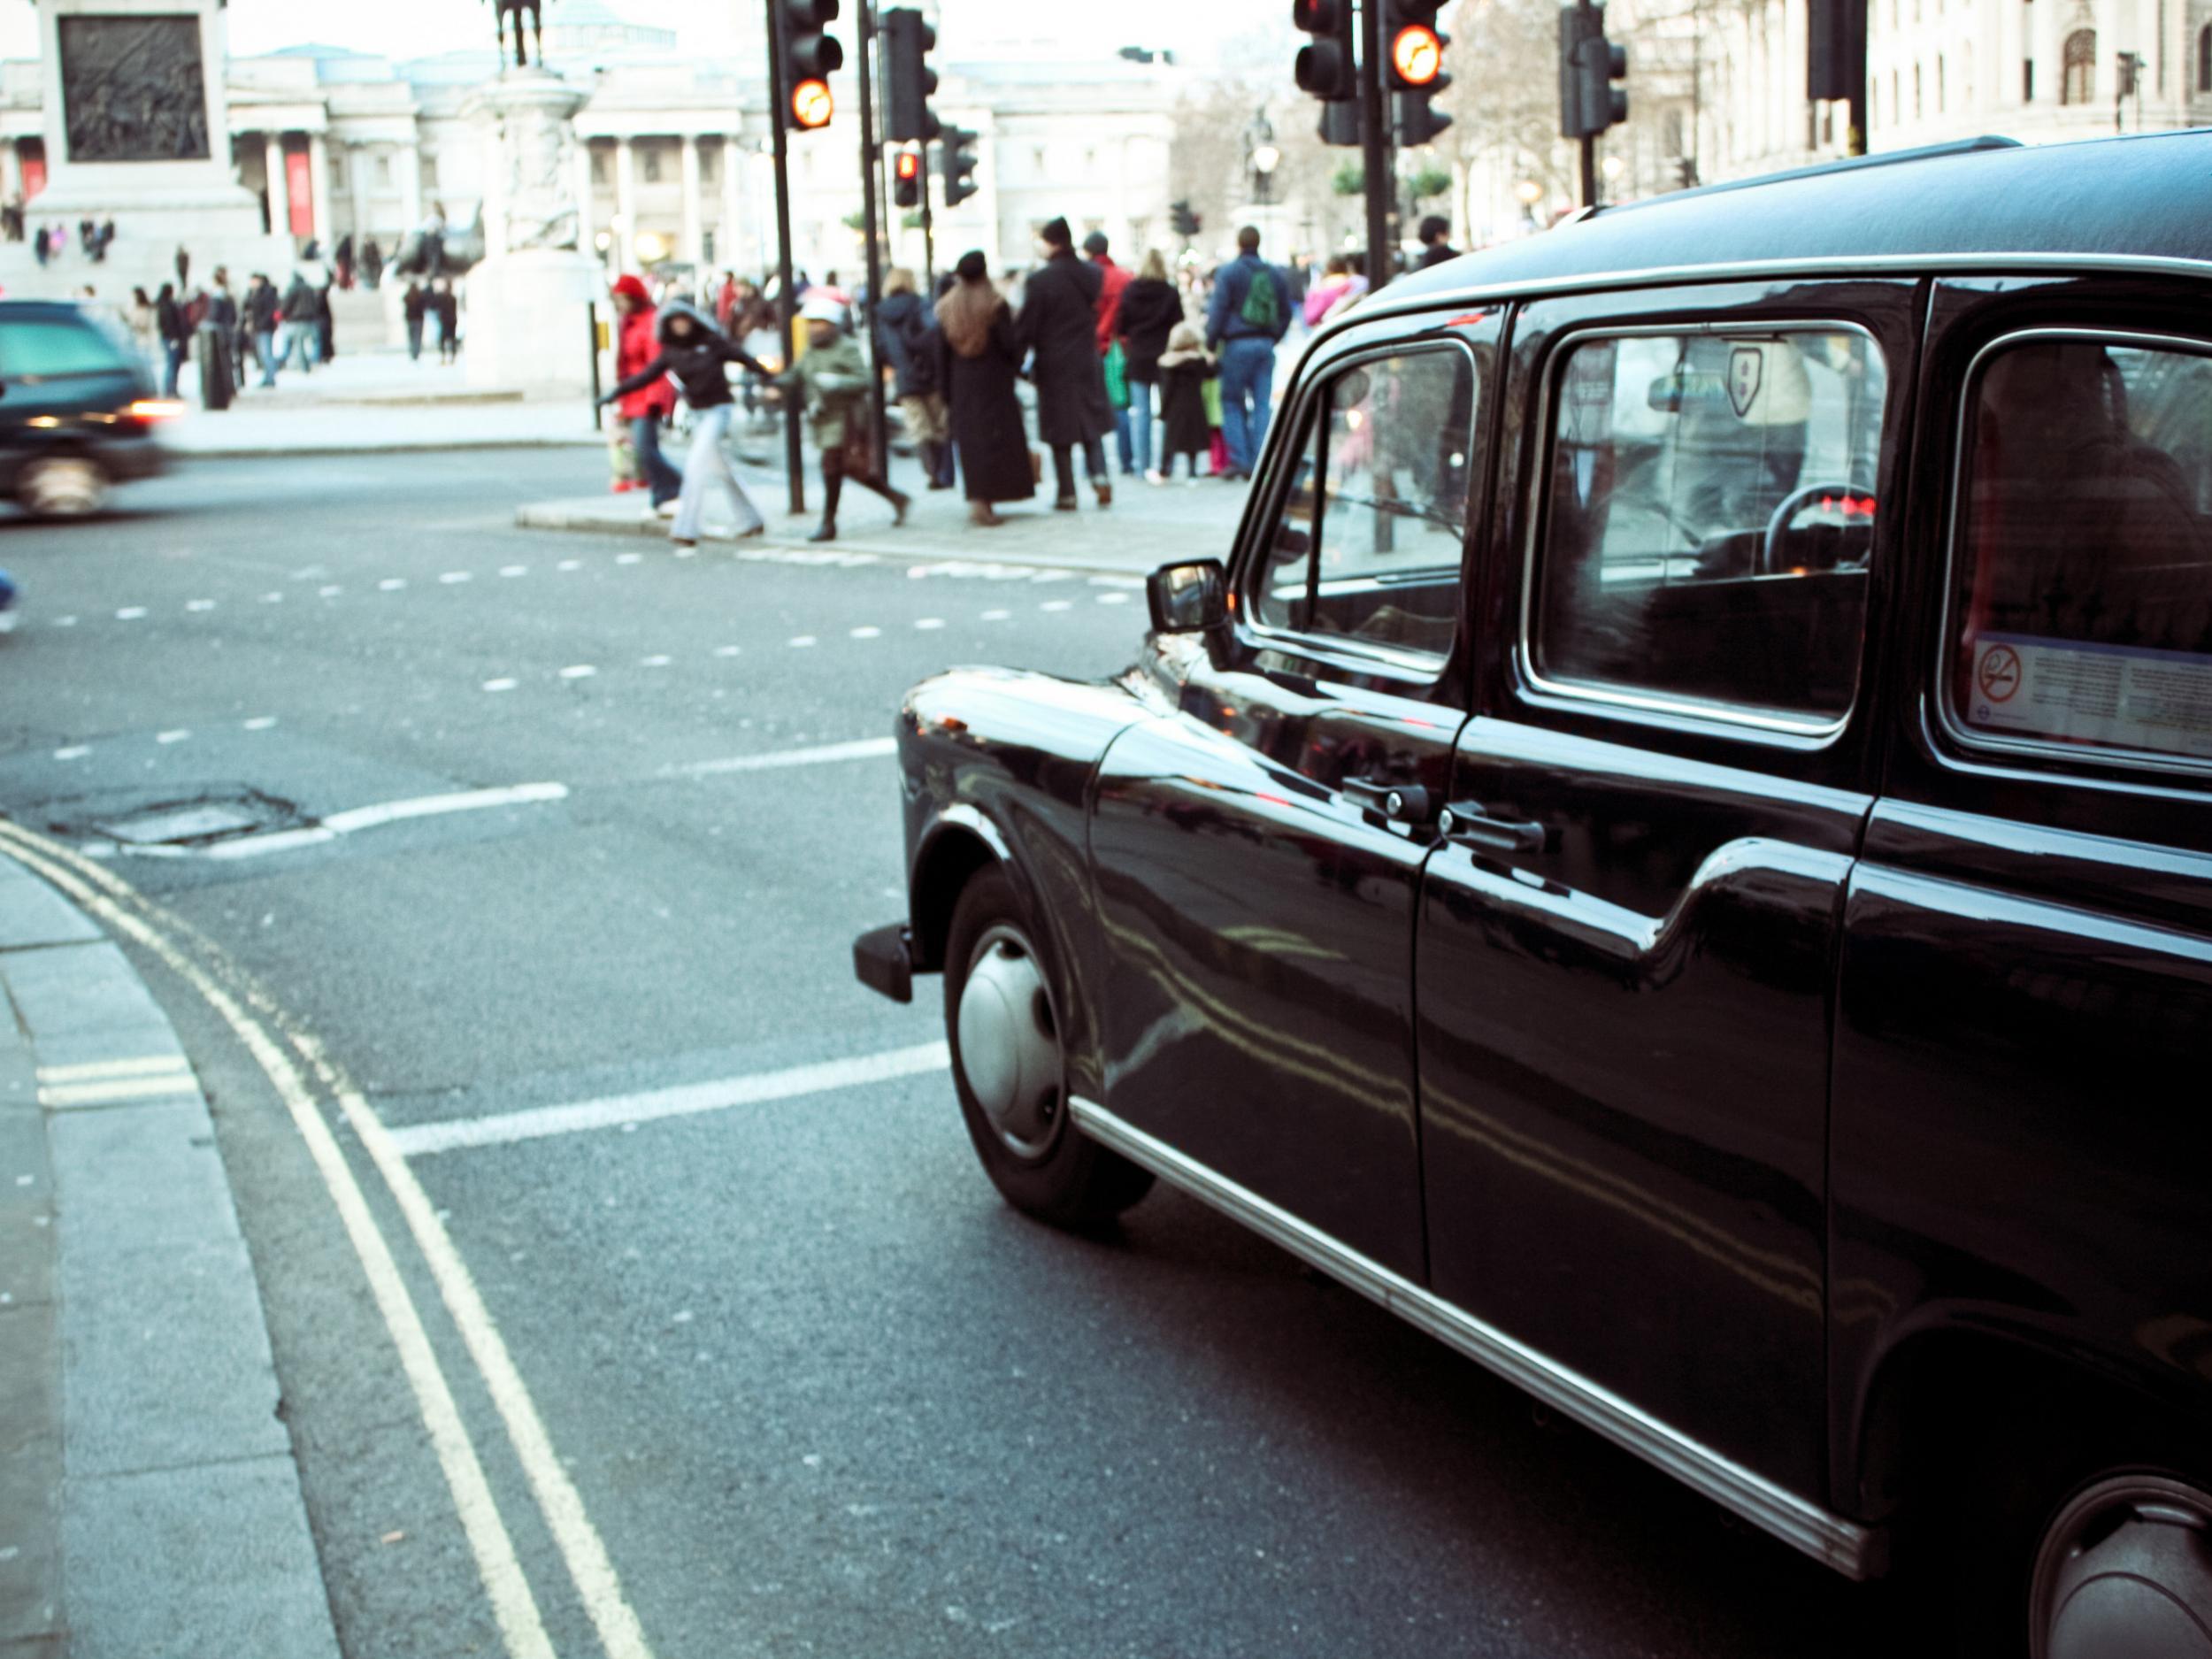 Drivers using all types of taxis from black cabs to minicabs have been accused of assault – the majority of which allegedly occur in London